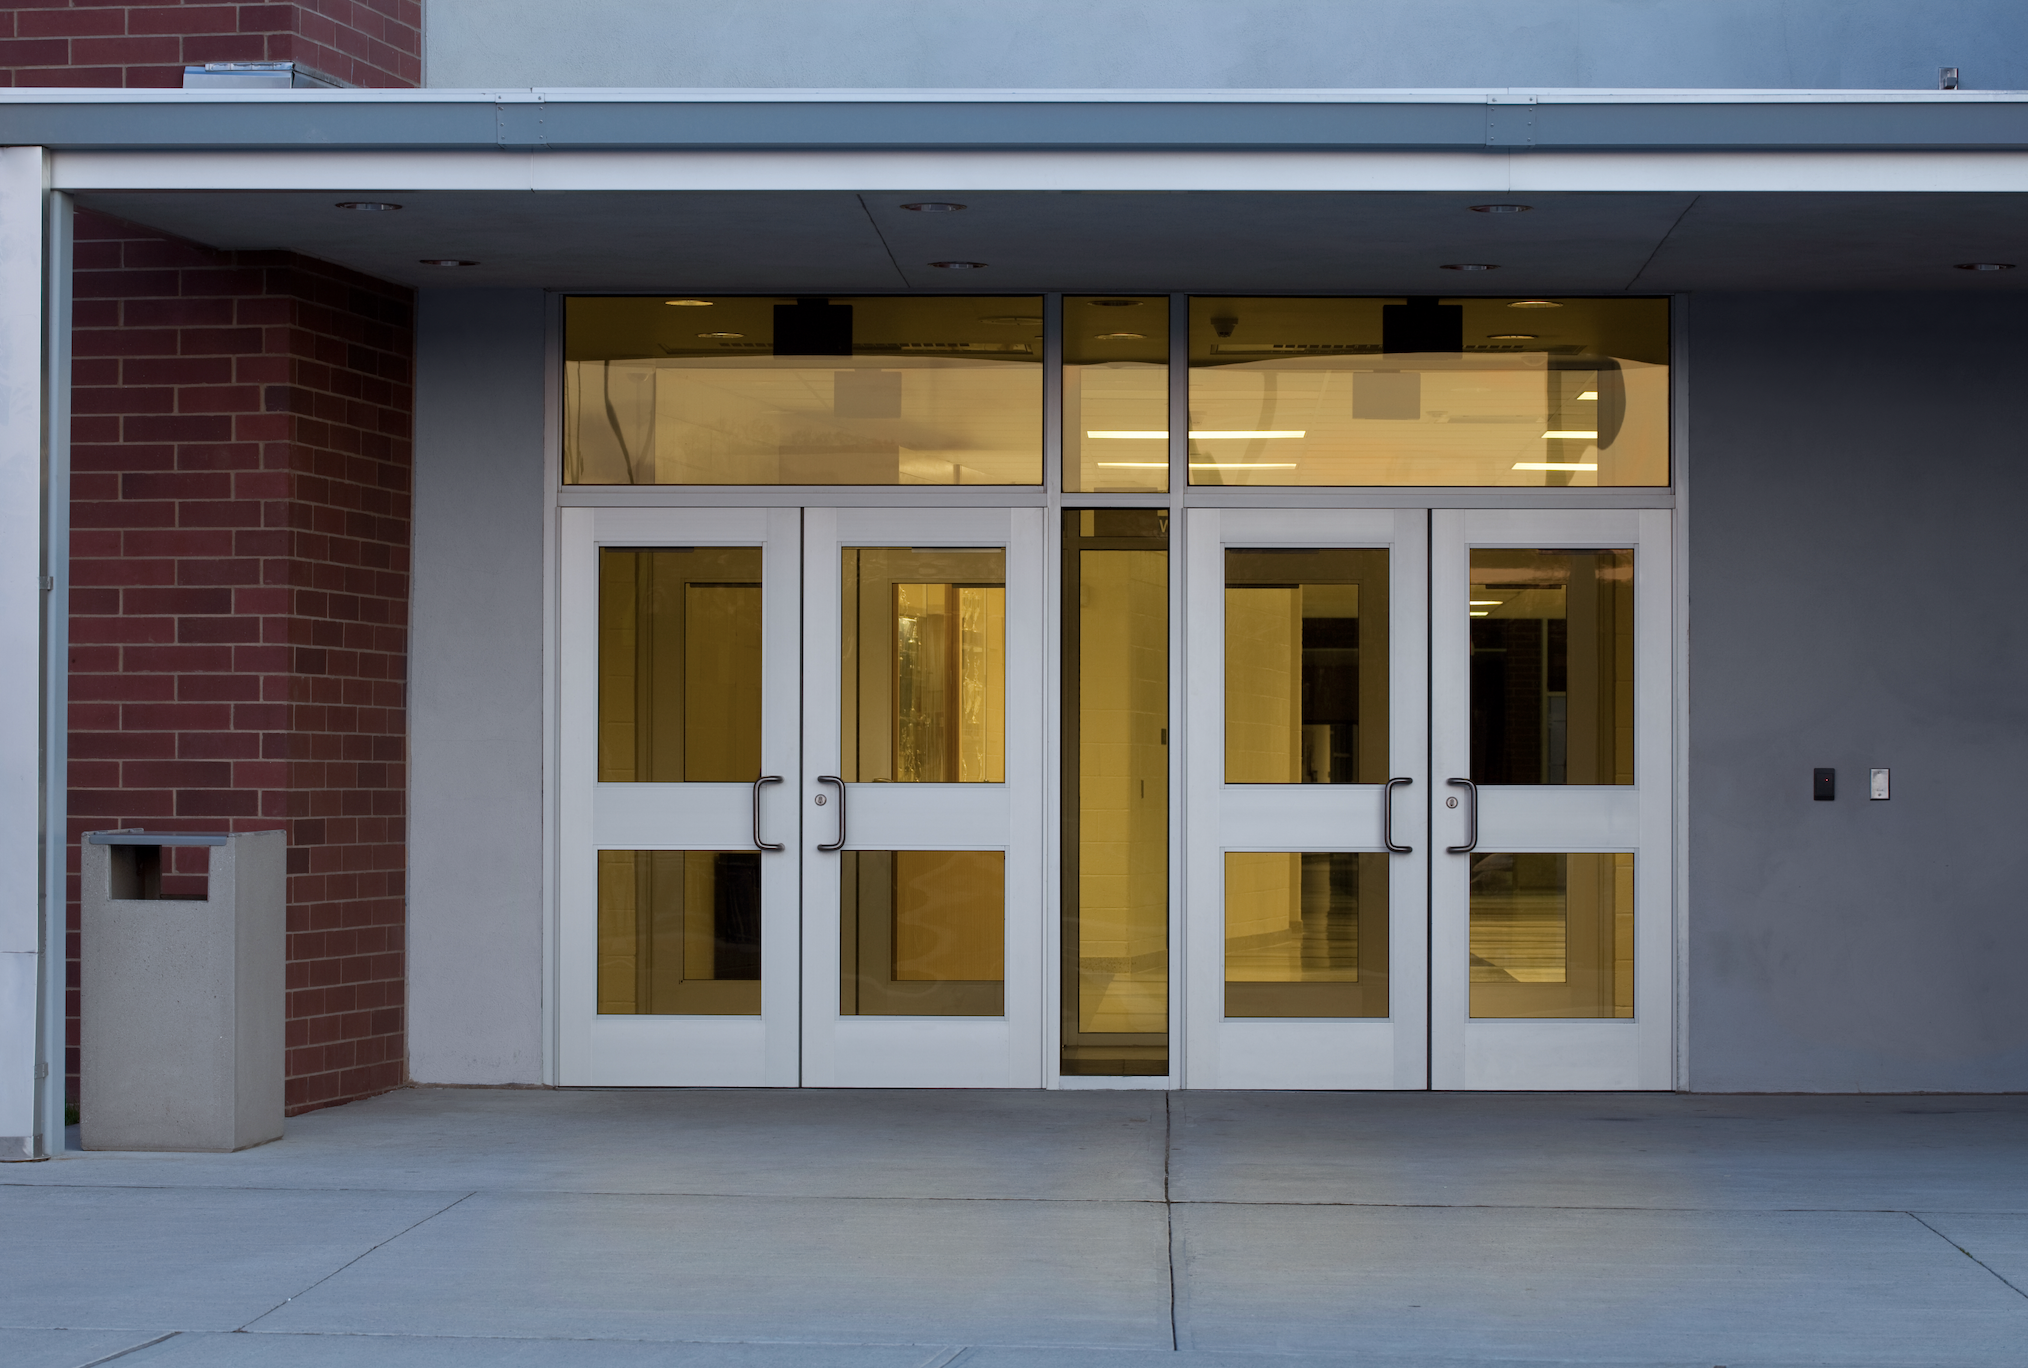 Entrance to a modern building with a set of double glass doors, indicating access to a workplace